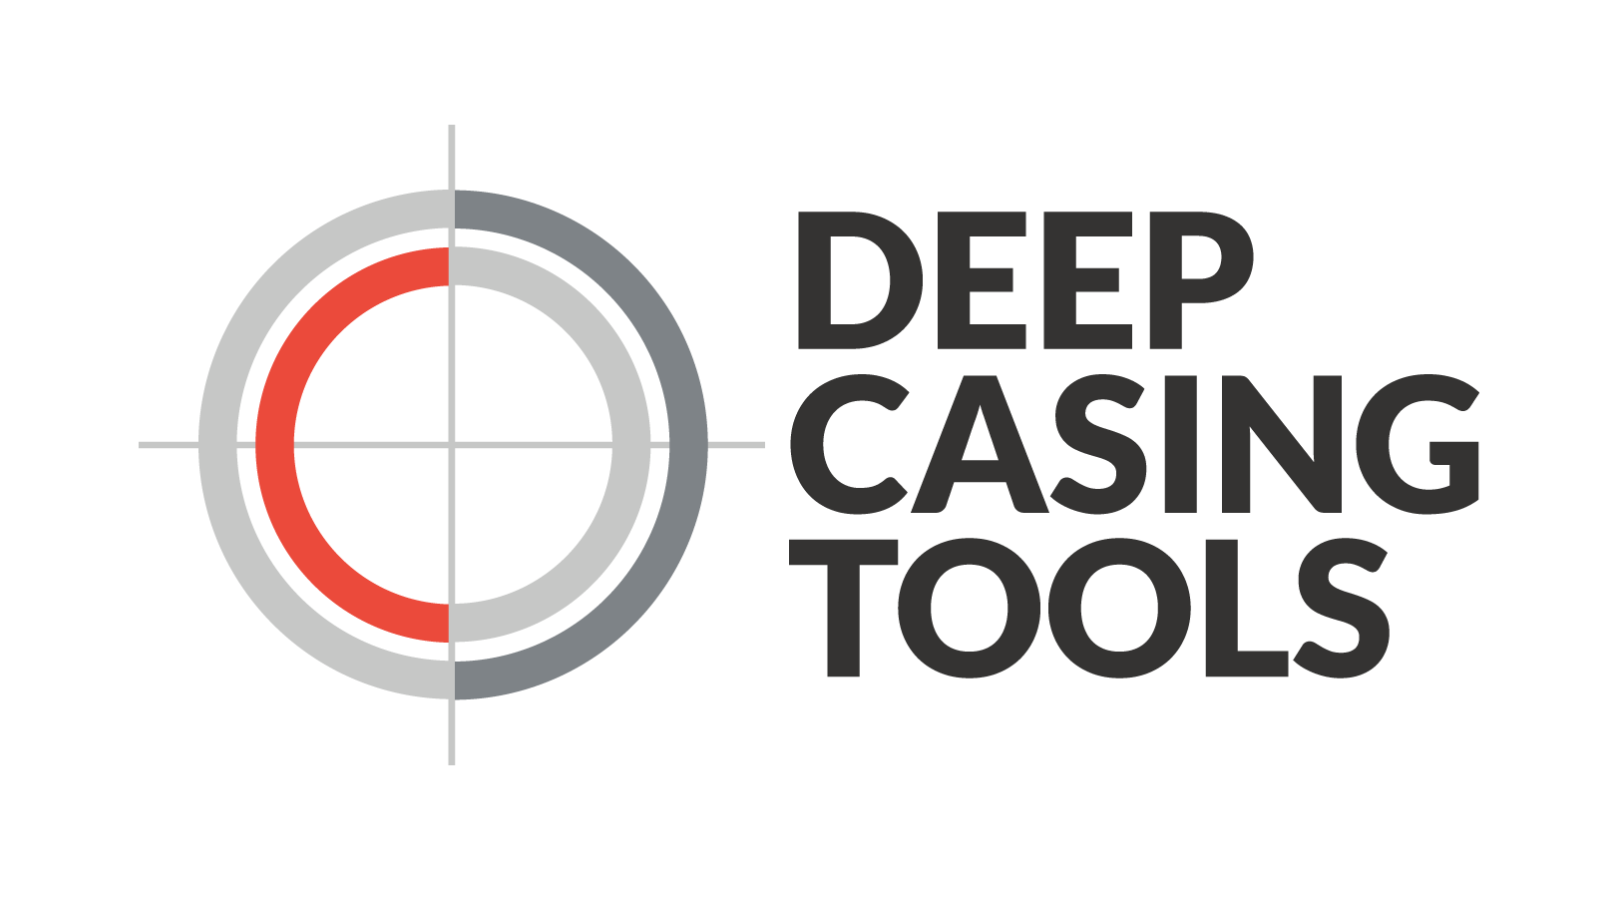 Deep Casing Tools welcomes key appointments to drive growth and innovation